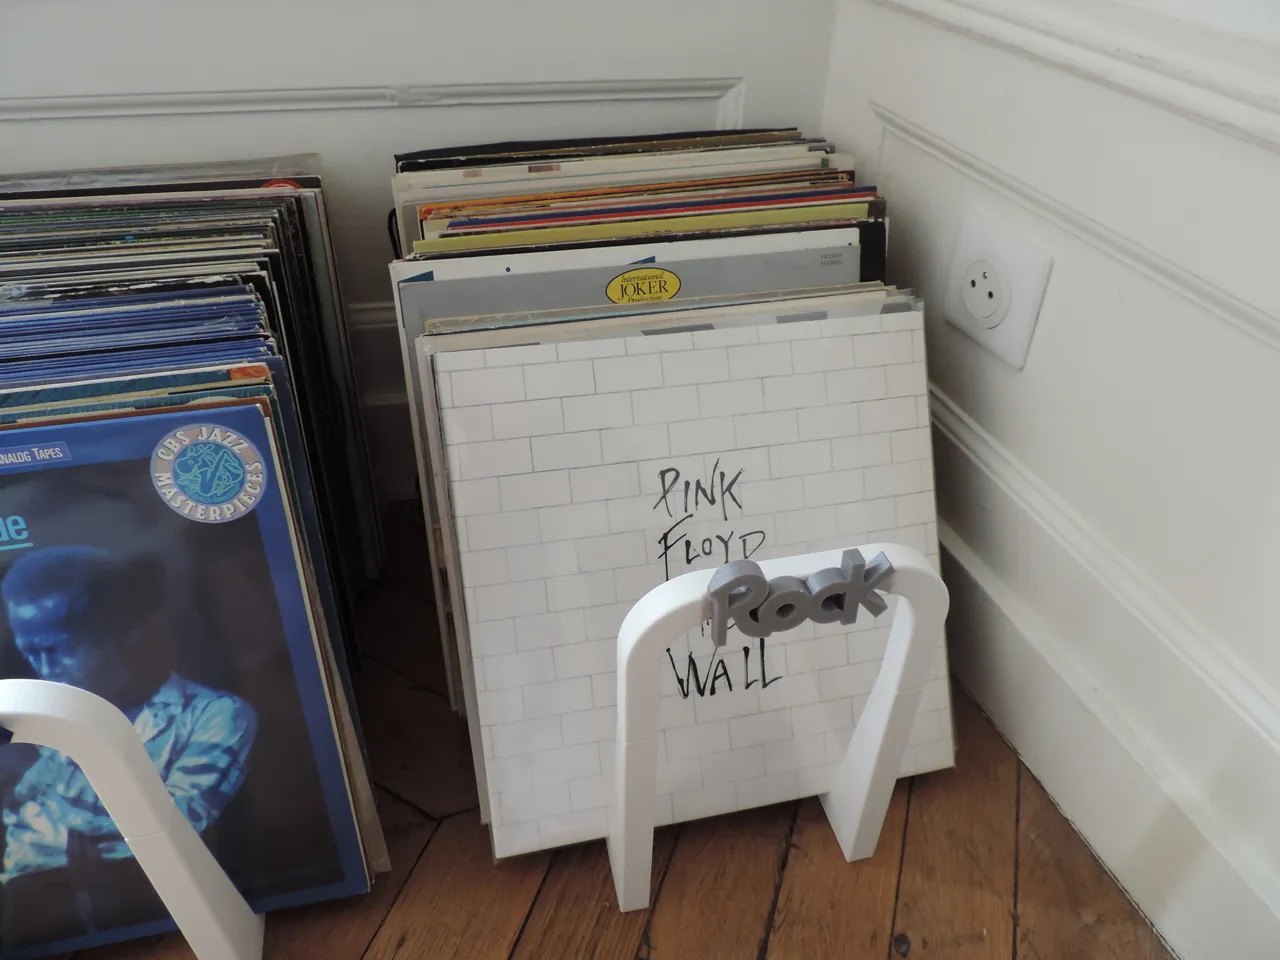 Screwless wall holder for vinyl records by Hallstein